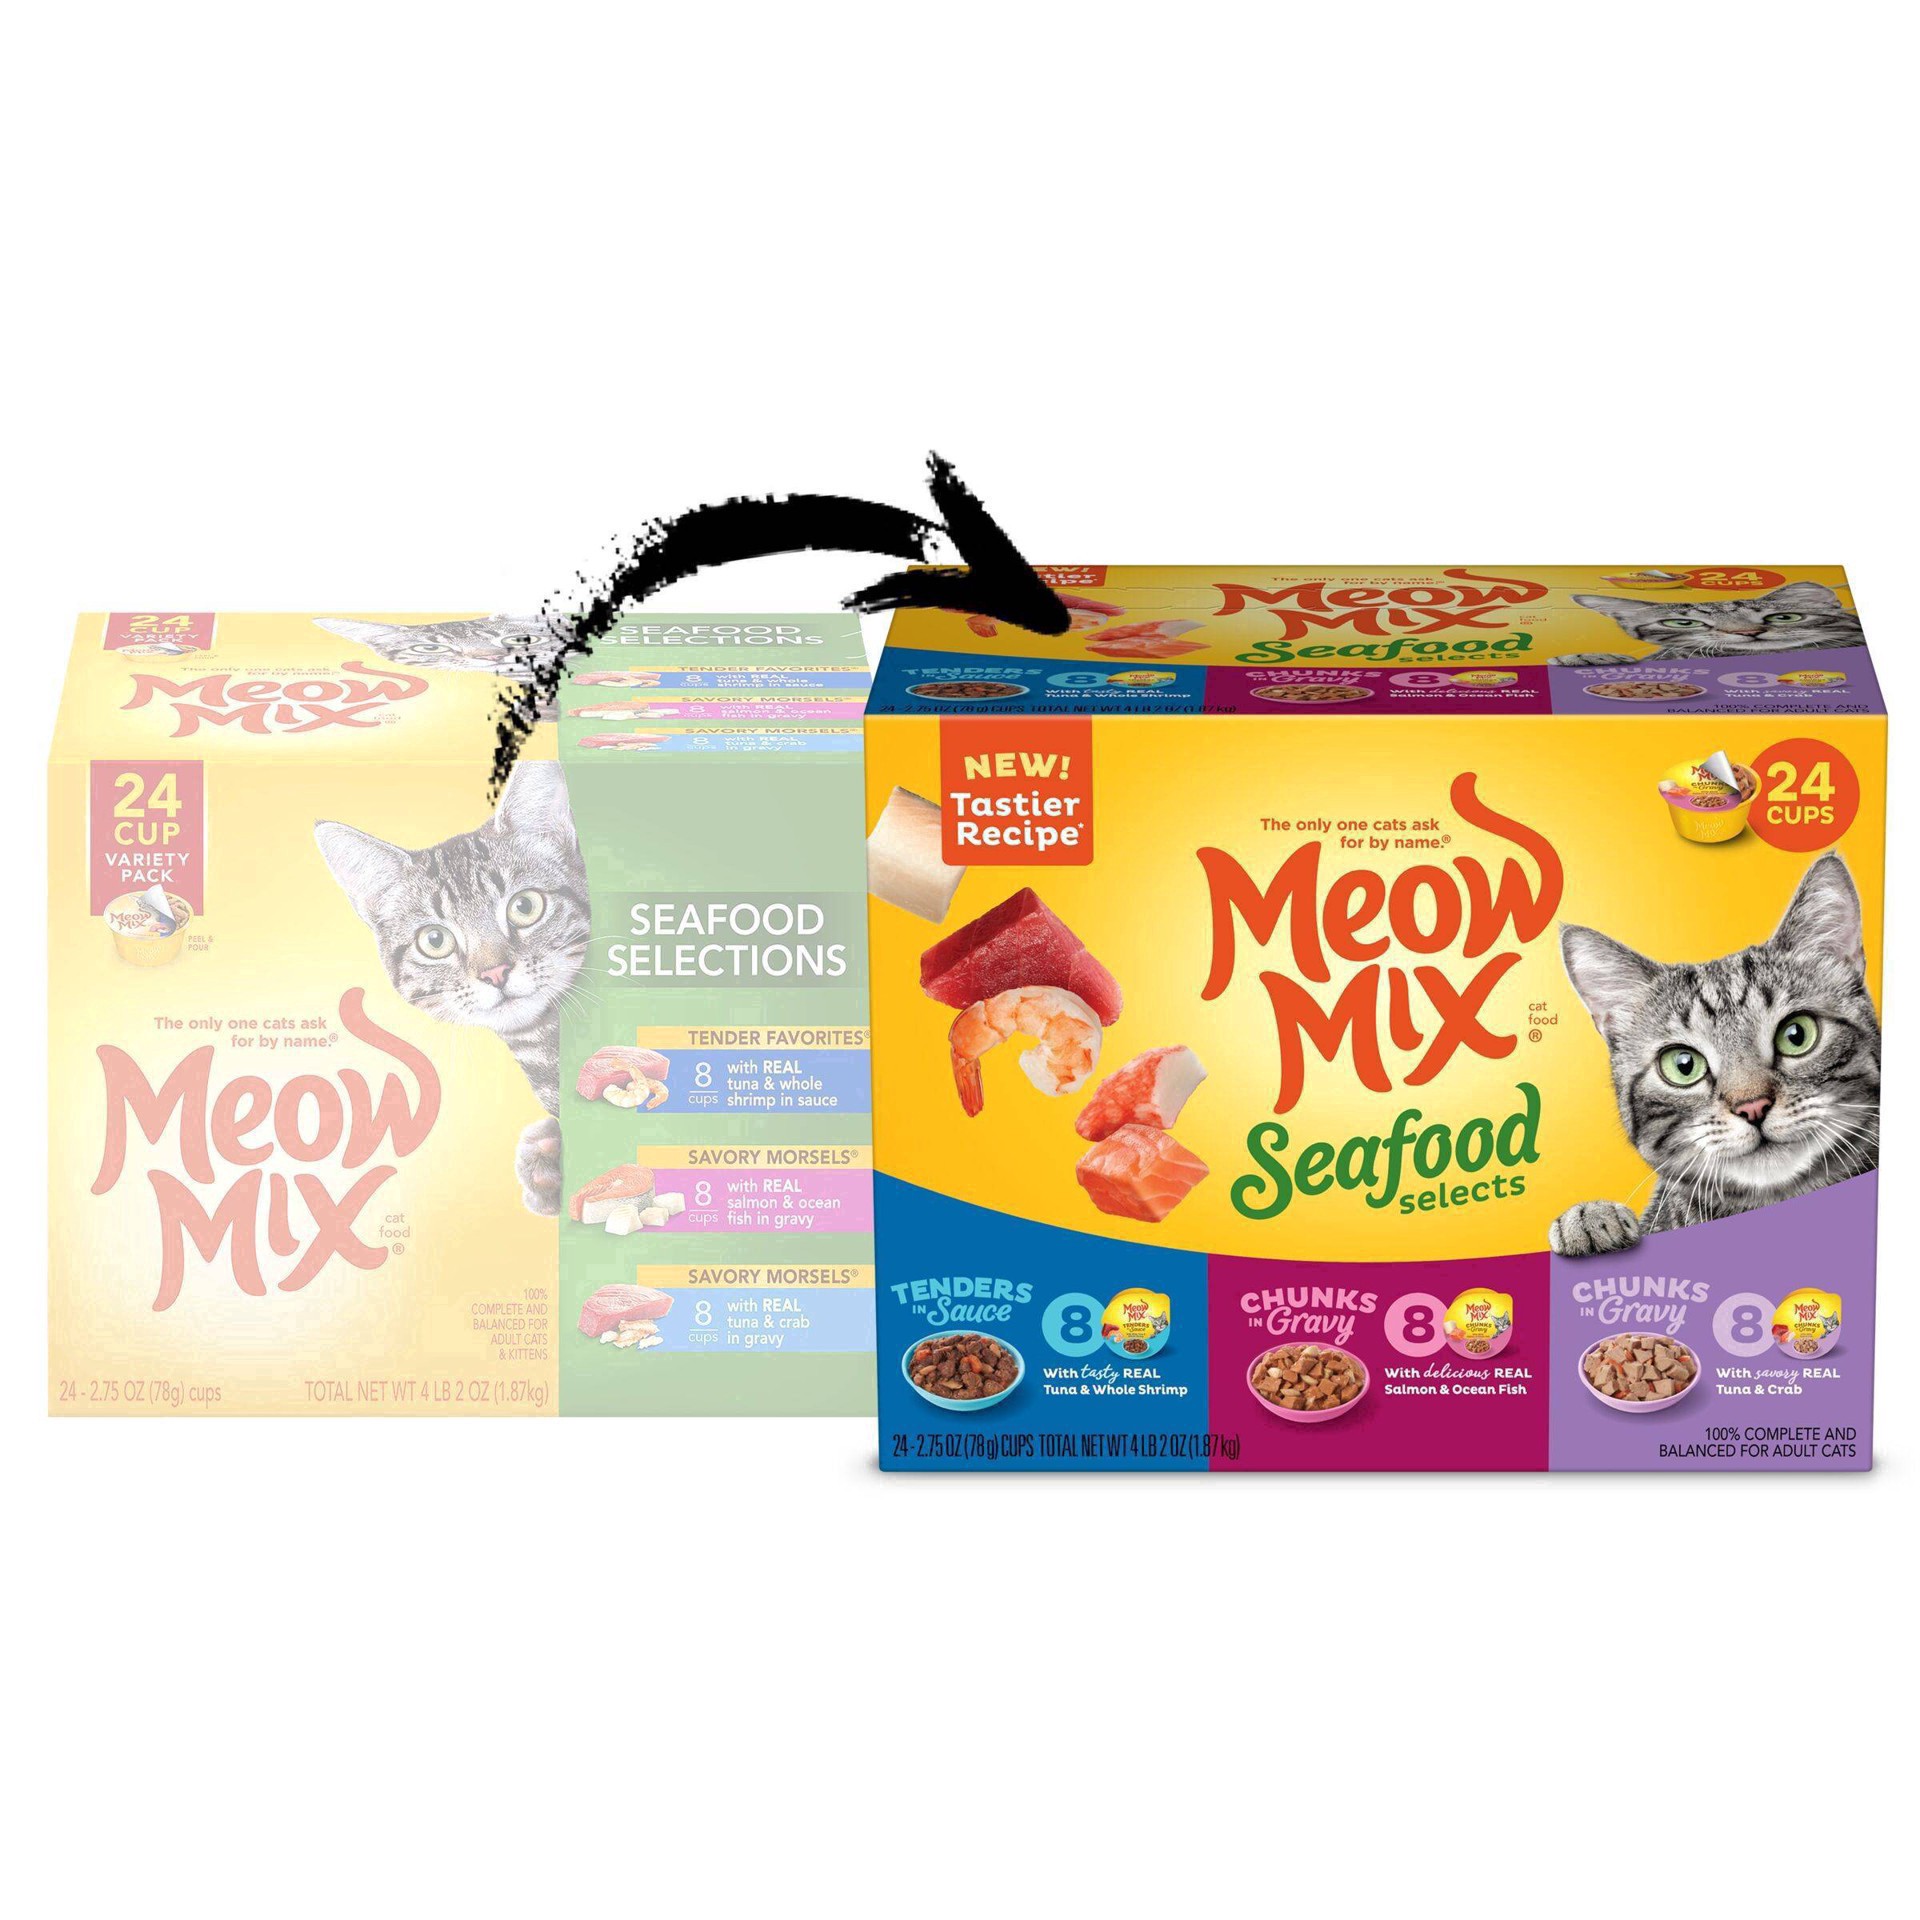 slide 11 of 27, Meow Mix Seafood Selects Wet Cat Food Variety Pack, 24 Cups, 2.75 Oz. Each (Packaging And Formulation Updates Underway), 24 ct